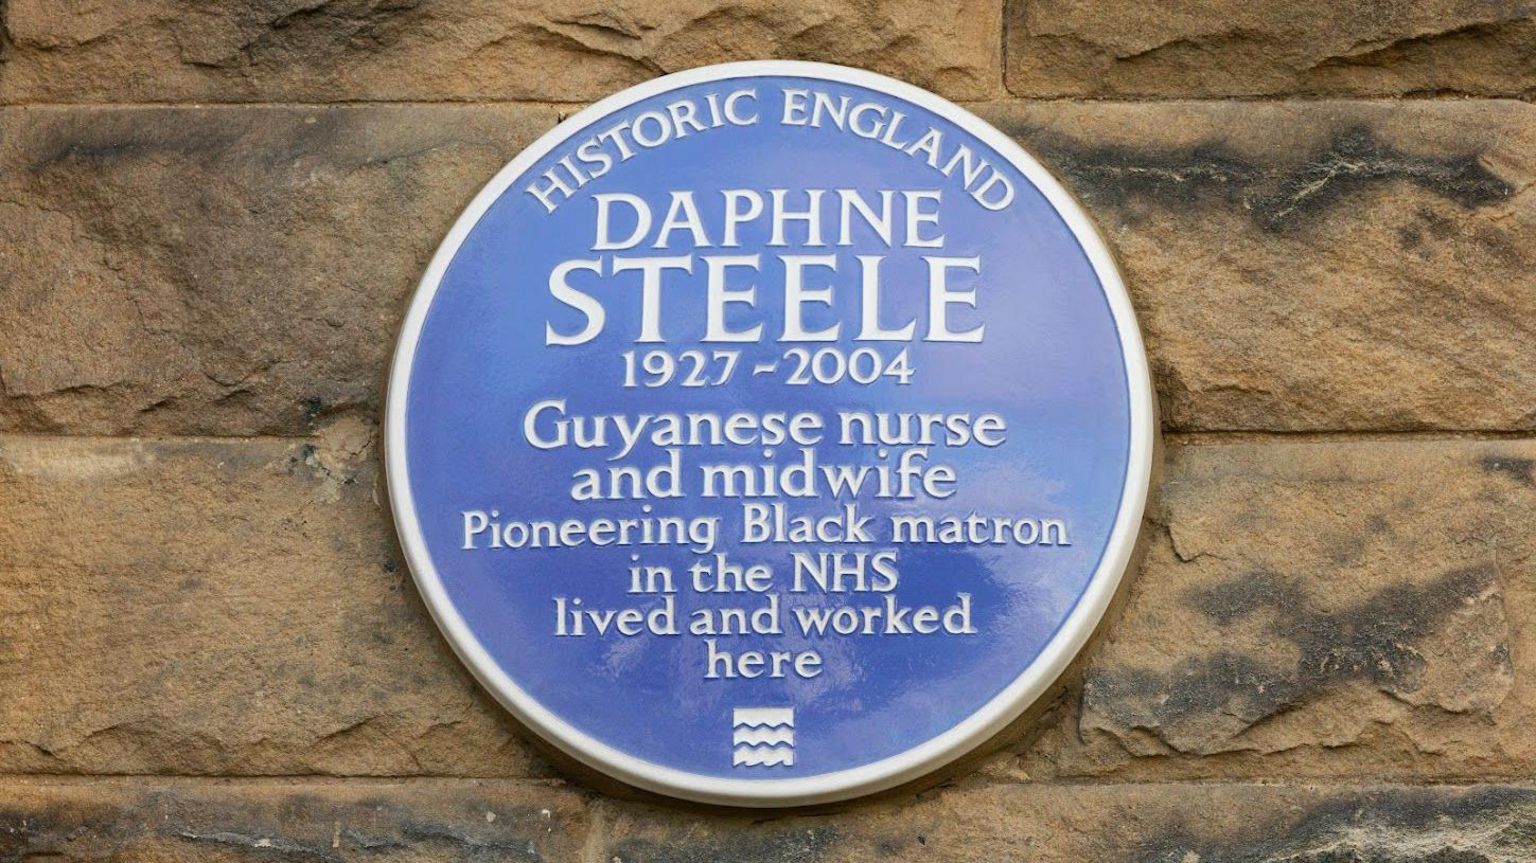 A blue plaque honouring Daphne Steele, a pioneering Guyanese nurse and midwife in the NHS